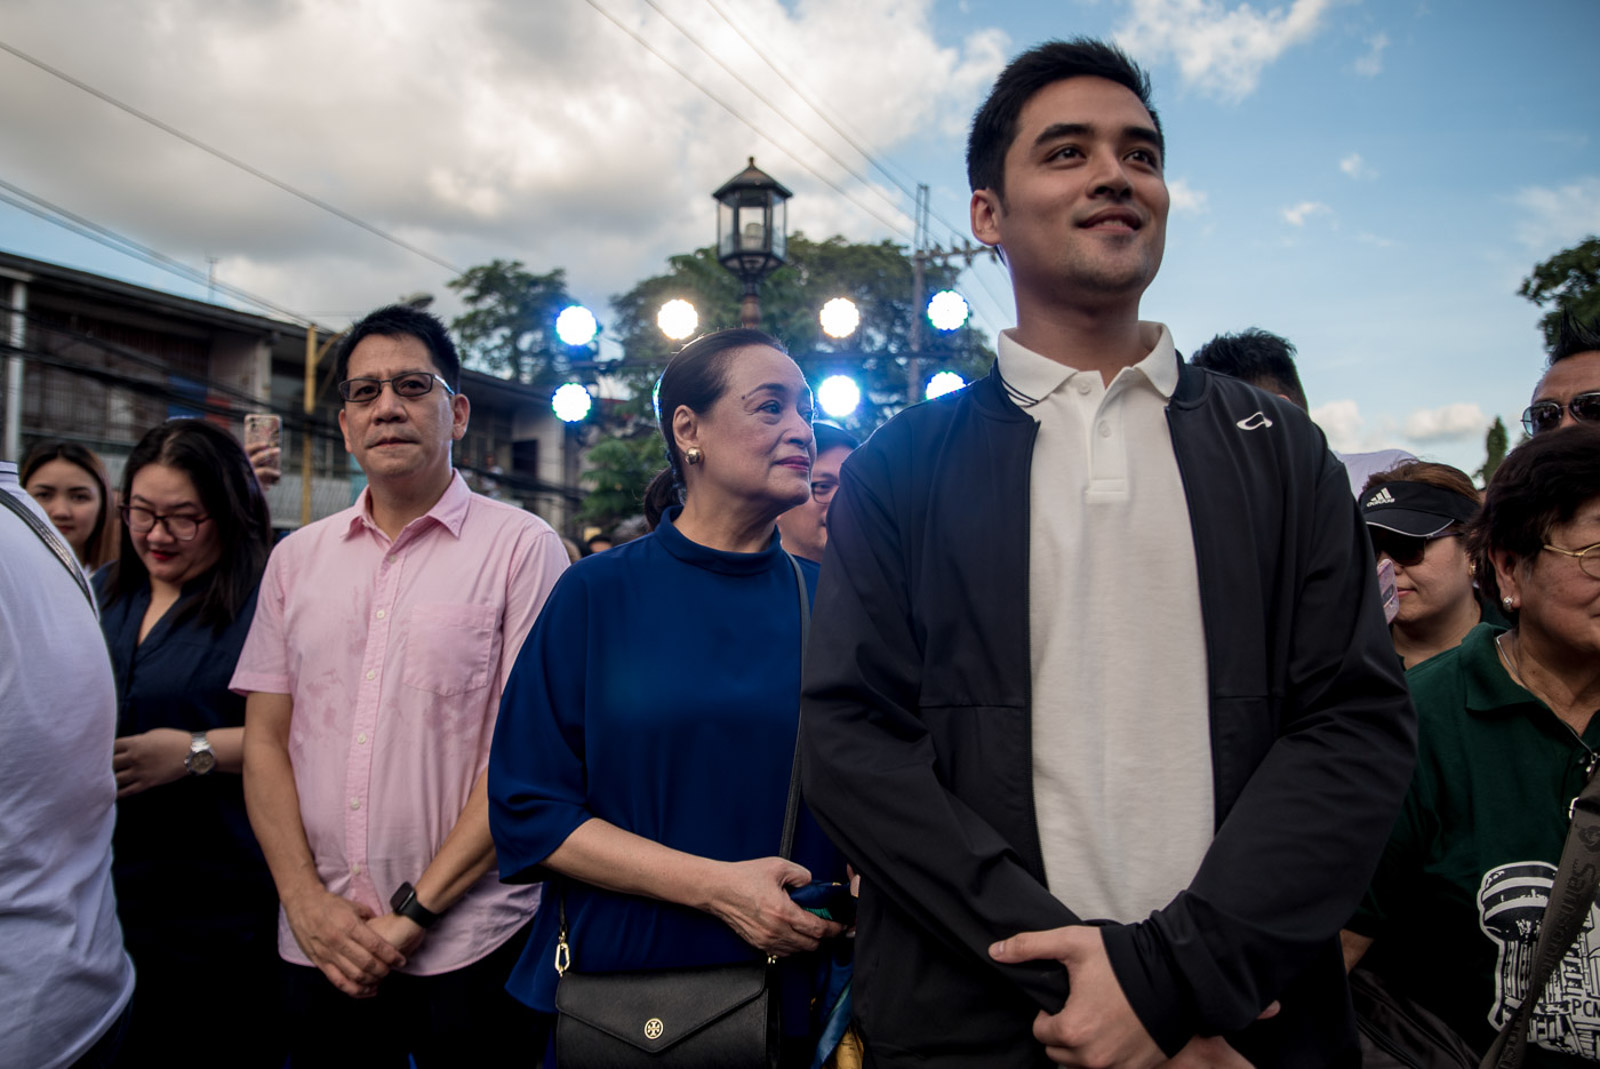 FOLLOWER, LEADER. Pasig Mayor Vico Sotto waiting to deliver his first State of the City Address on his 100th day in office on October 8, 2019. With him are his mother, actress Coney Reyes, and Pasig Representative Roman Romulo. File photo by Lisa Marie David/Rappler 